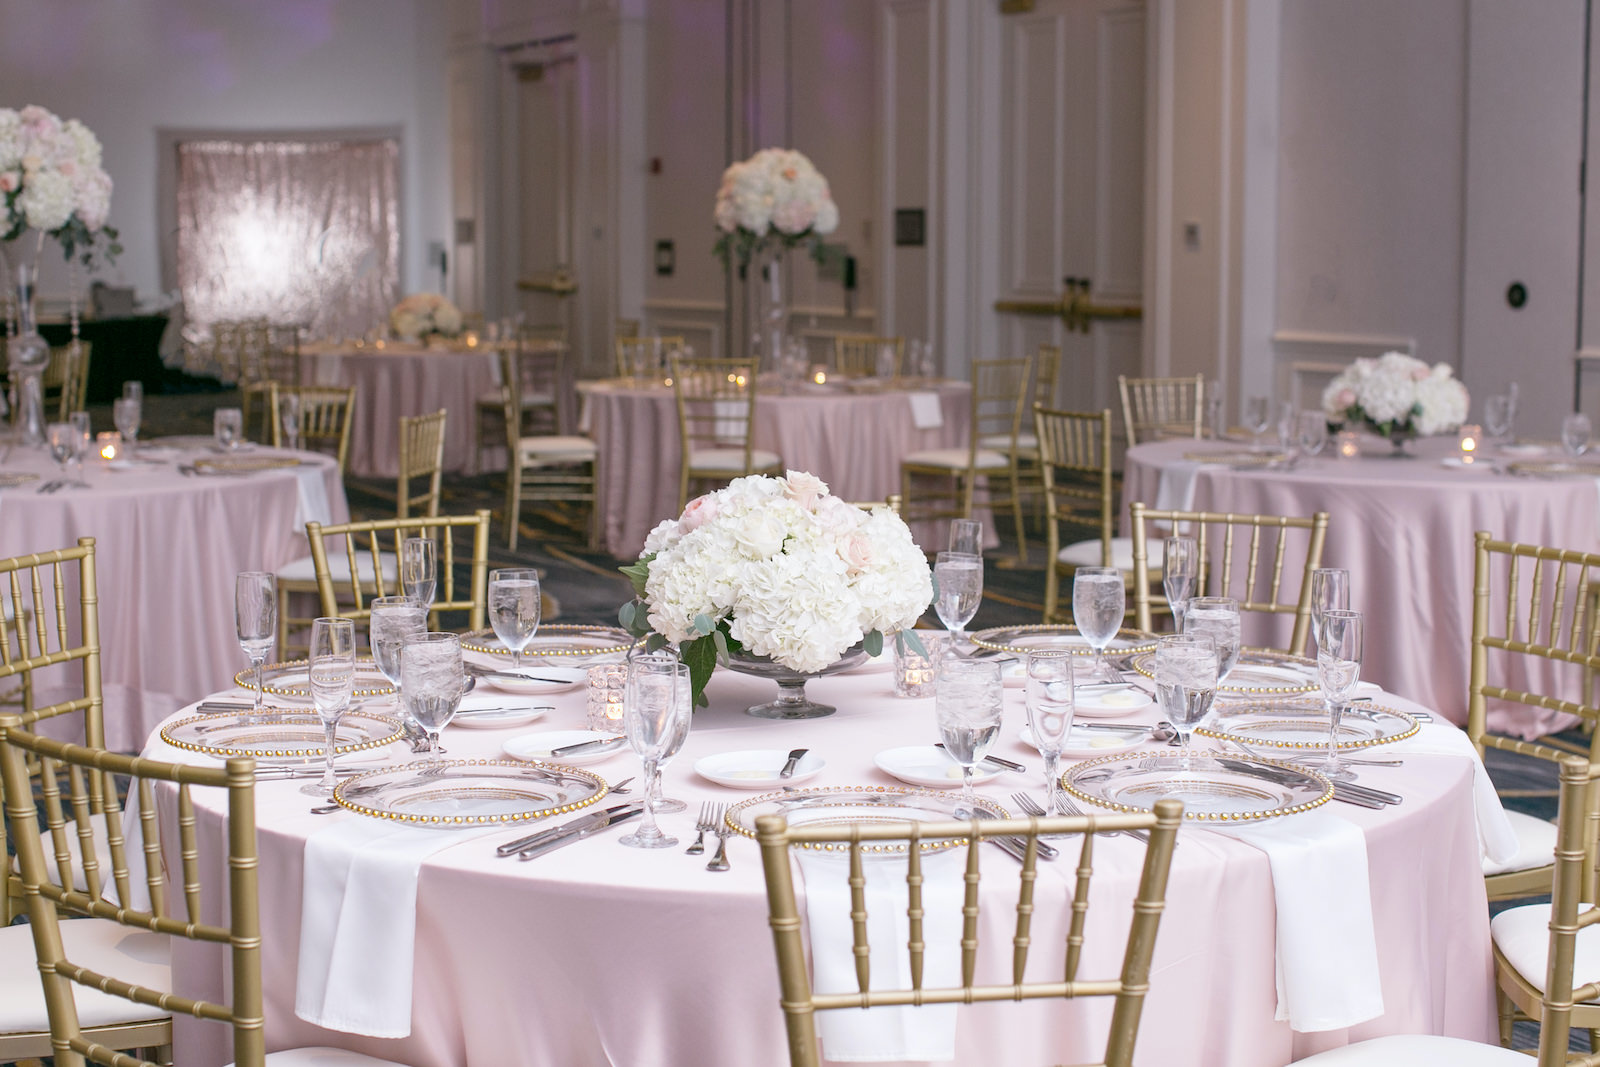 Indoor Downtown Tampa Hotel Ballroom Wedding Reception | Blush Pink Table Linens with Gold Chiavari Chairs and Gold Rim Beaded Edge Glass Chargers | Blush Pink and White Centerpieces with Roses, Hydrangea, and Eucalyptus Greenery